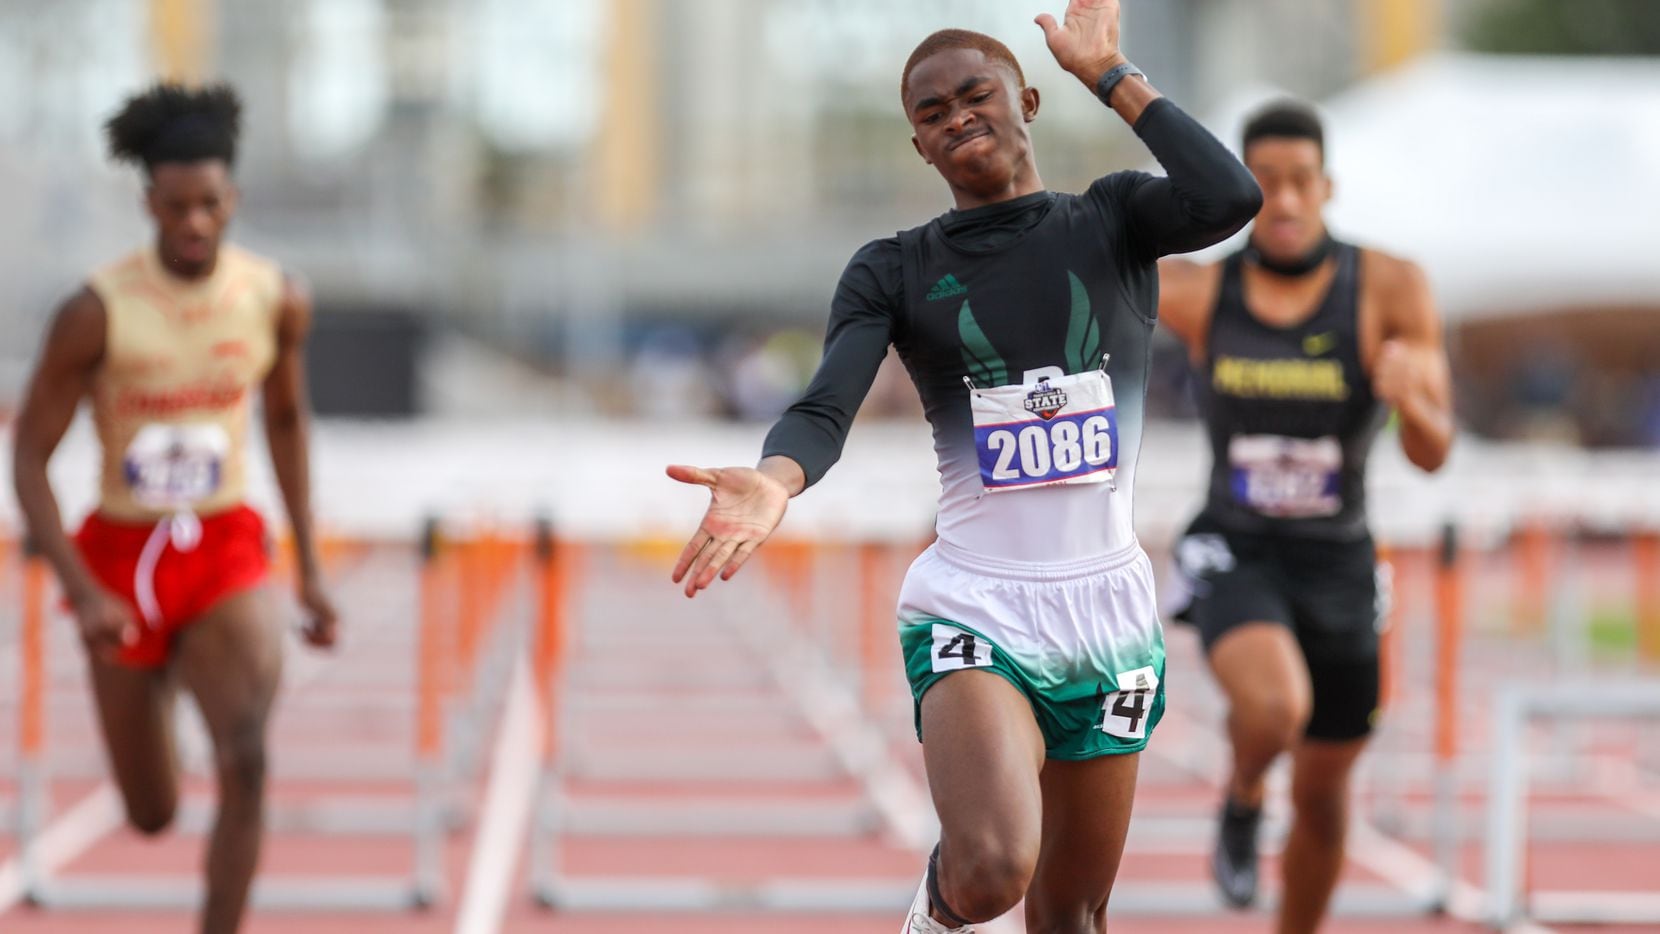 Mesquite Poteet's Kendrick Smallwood claps as he finishes first in the 5A Boys 110 meter hurdles during the UIL state track meet at the Mike A. Myers Stadium, at the University of Texas on May 7, 2021 in Austin, Texas.